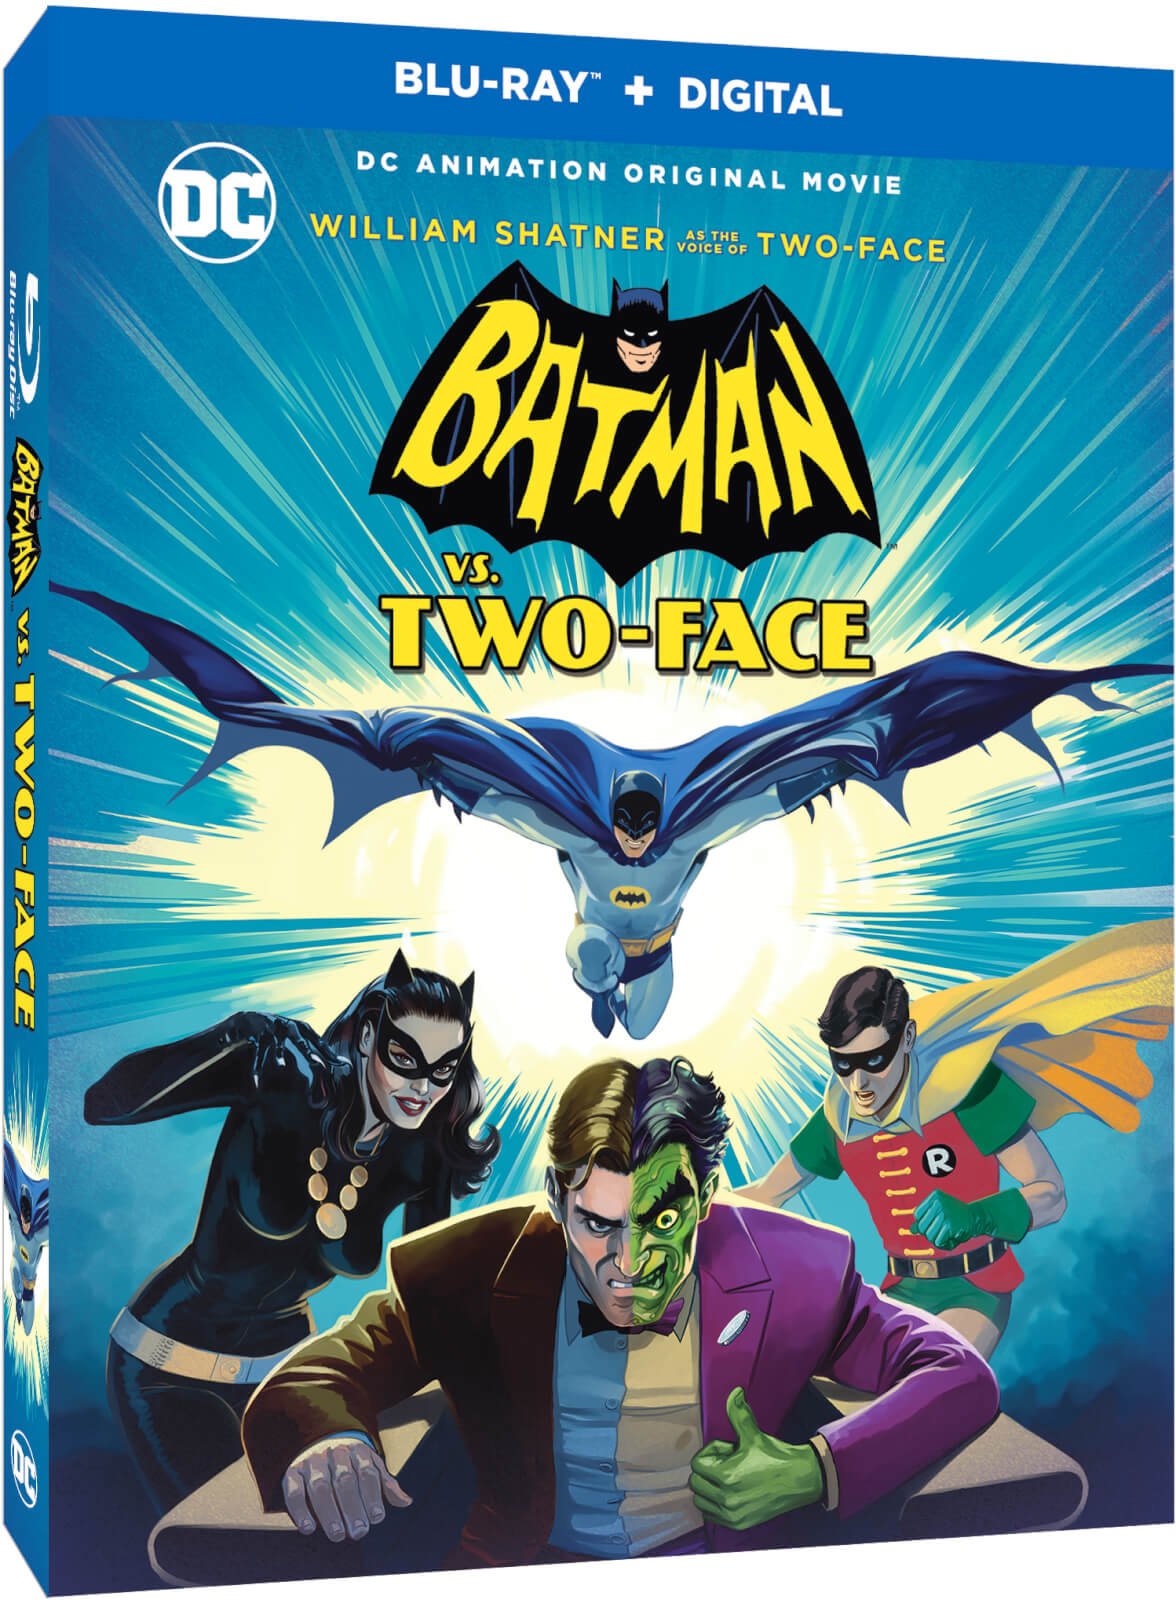 Batman Vs. Two Face [2017] (Blu-ray with Art Cards)